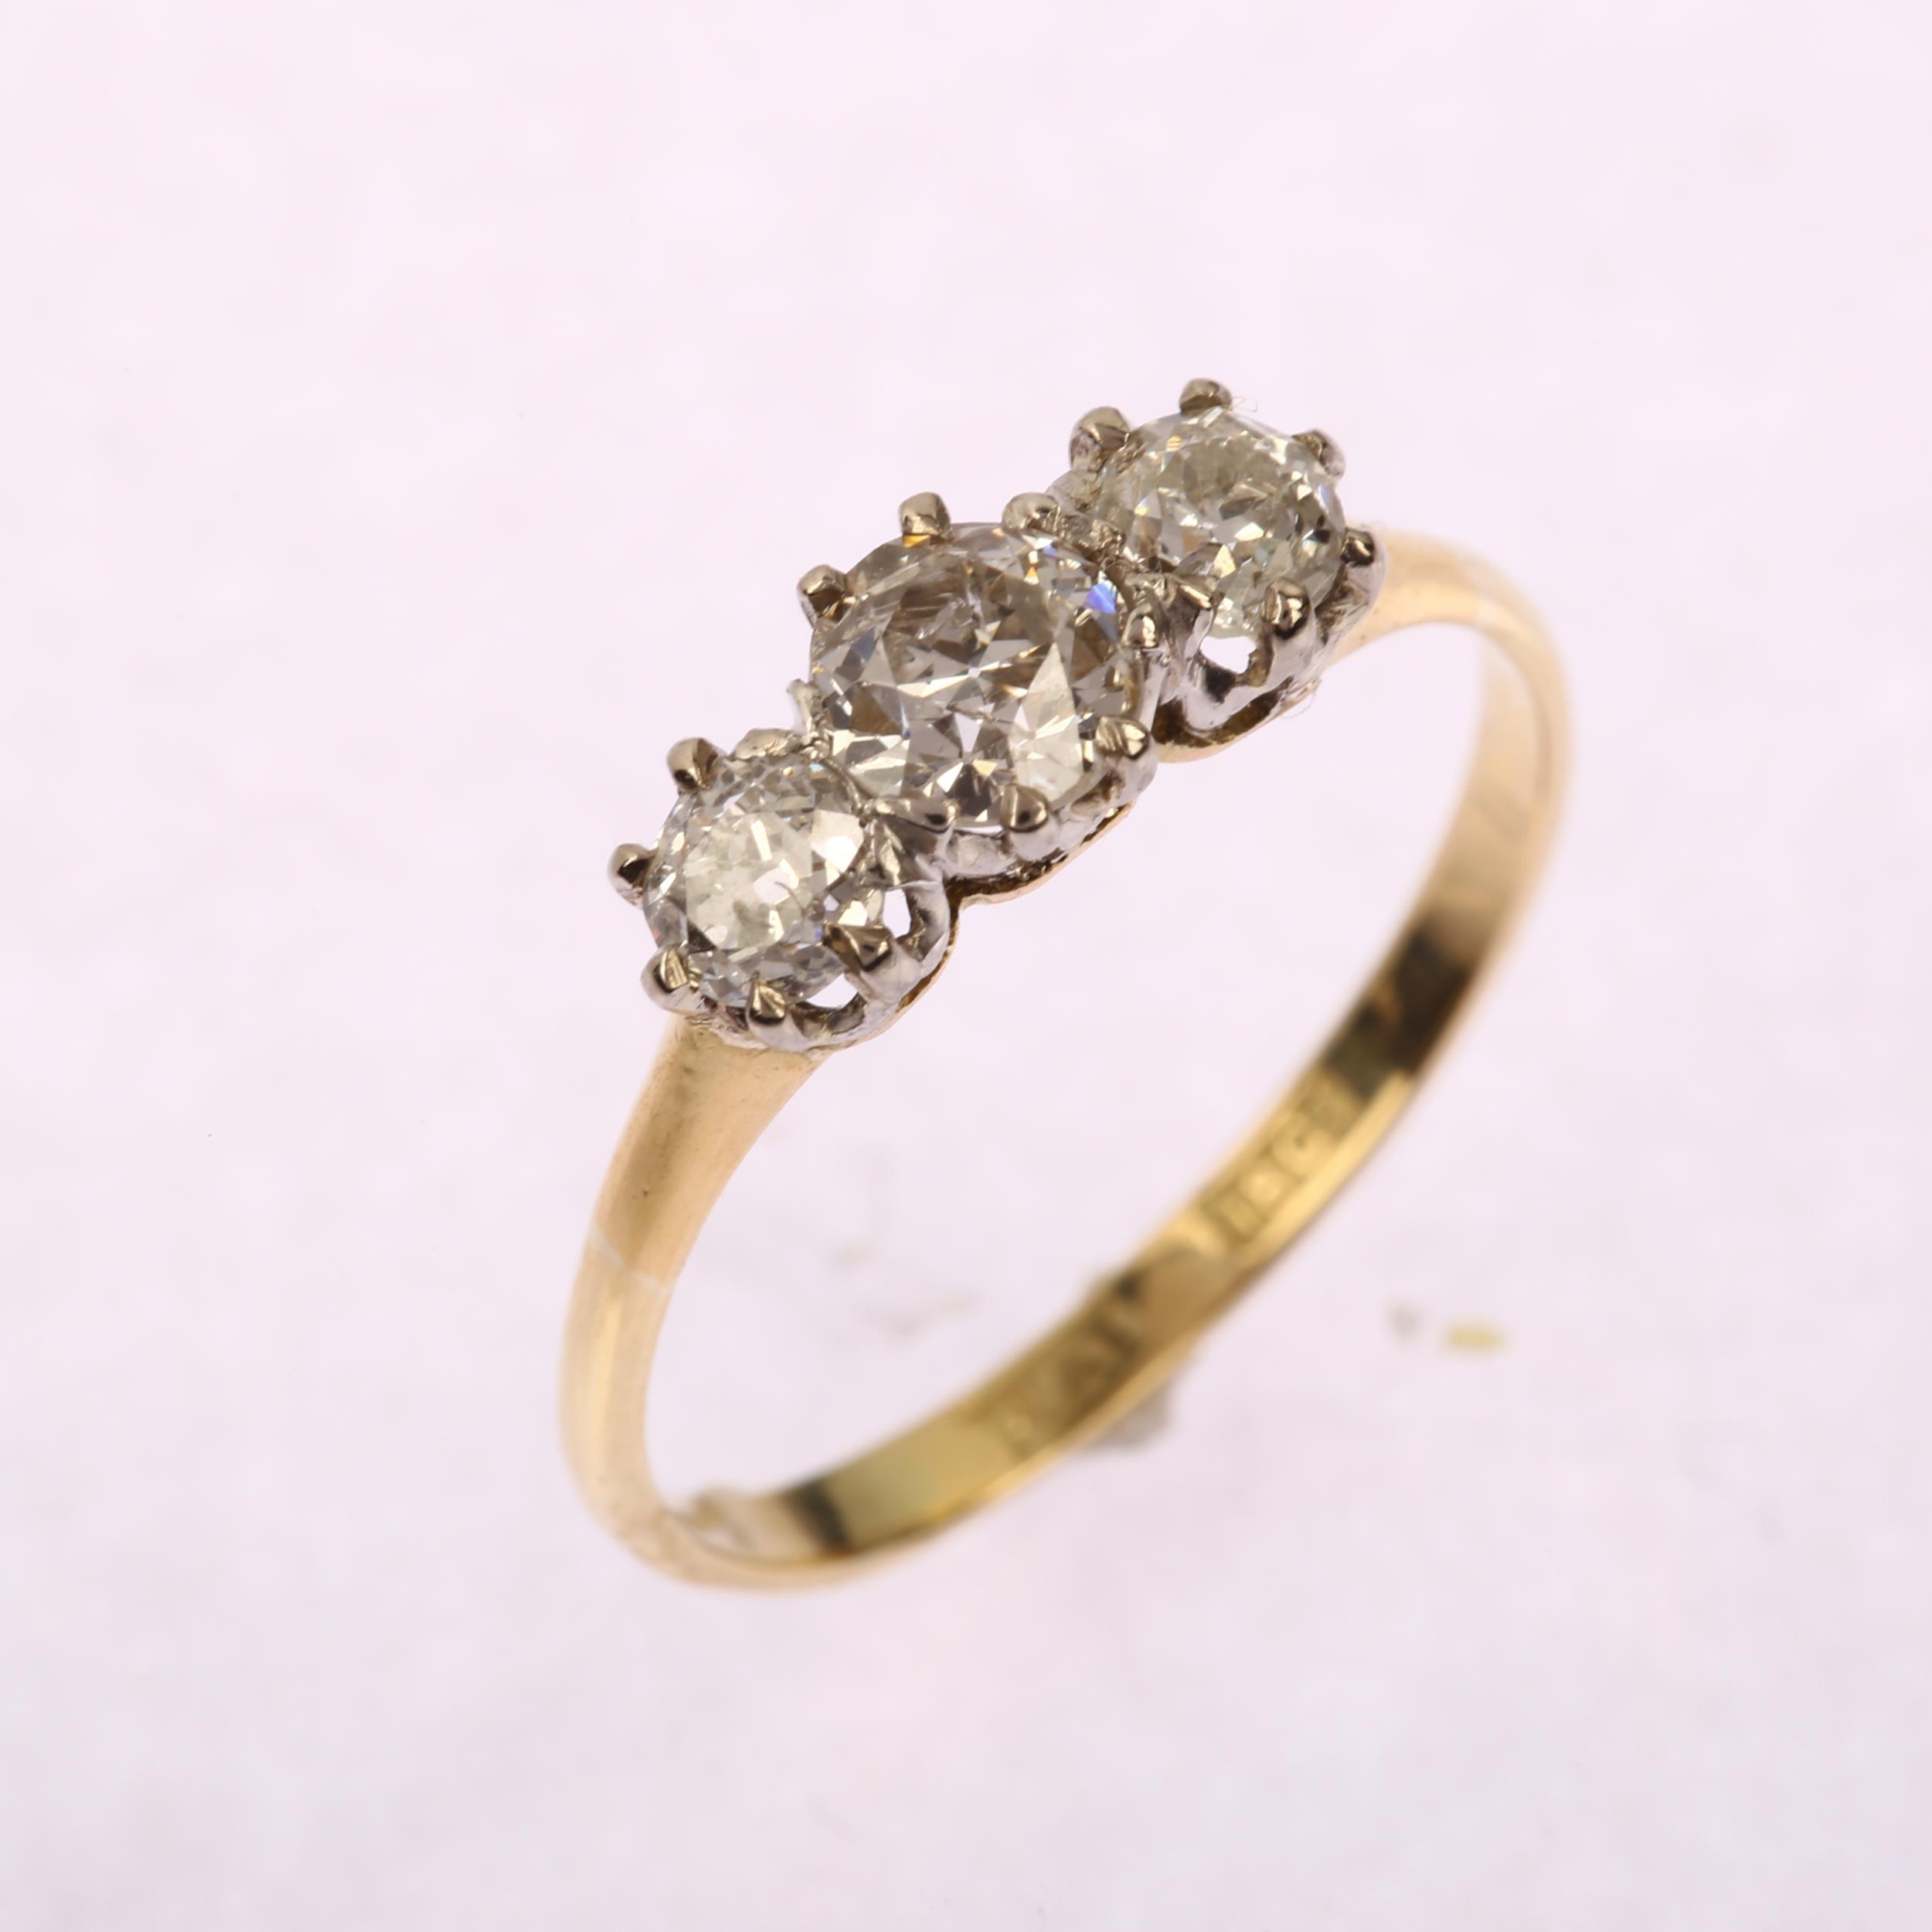 An early 20th century 18ct gold three stone diamond ring, set with old European-cut diamonds, - Image 2 of 4